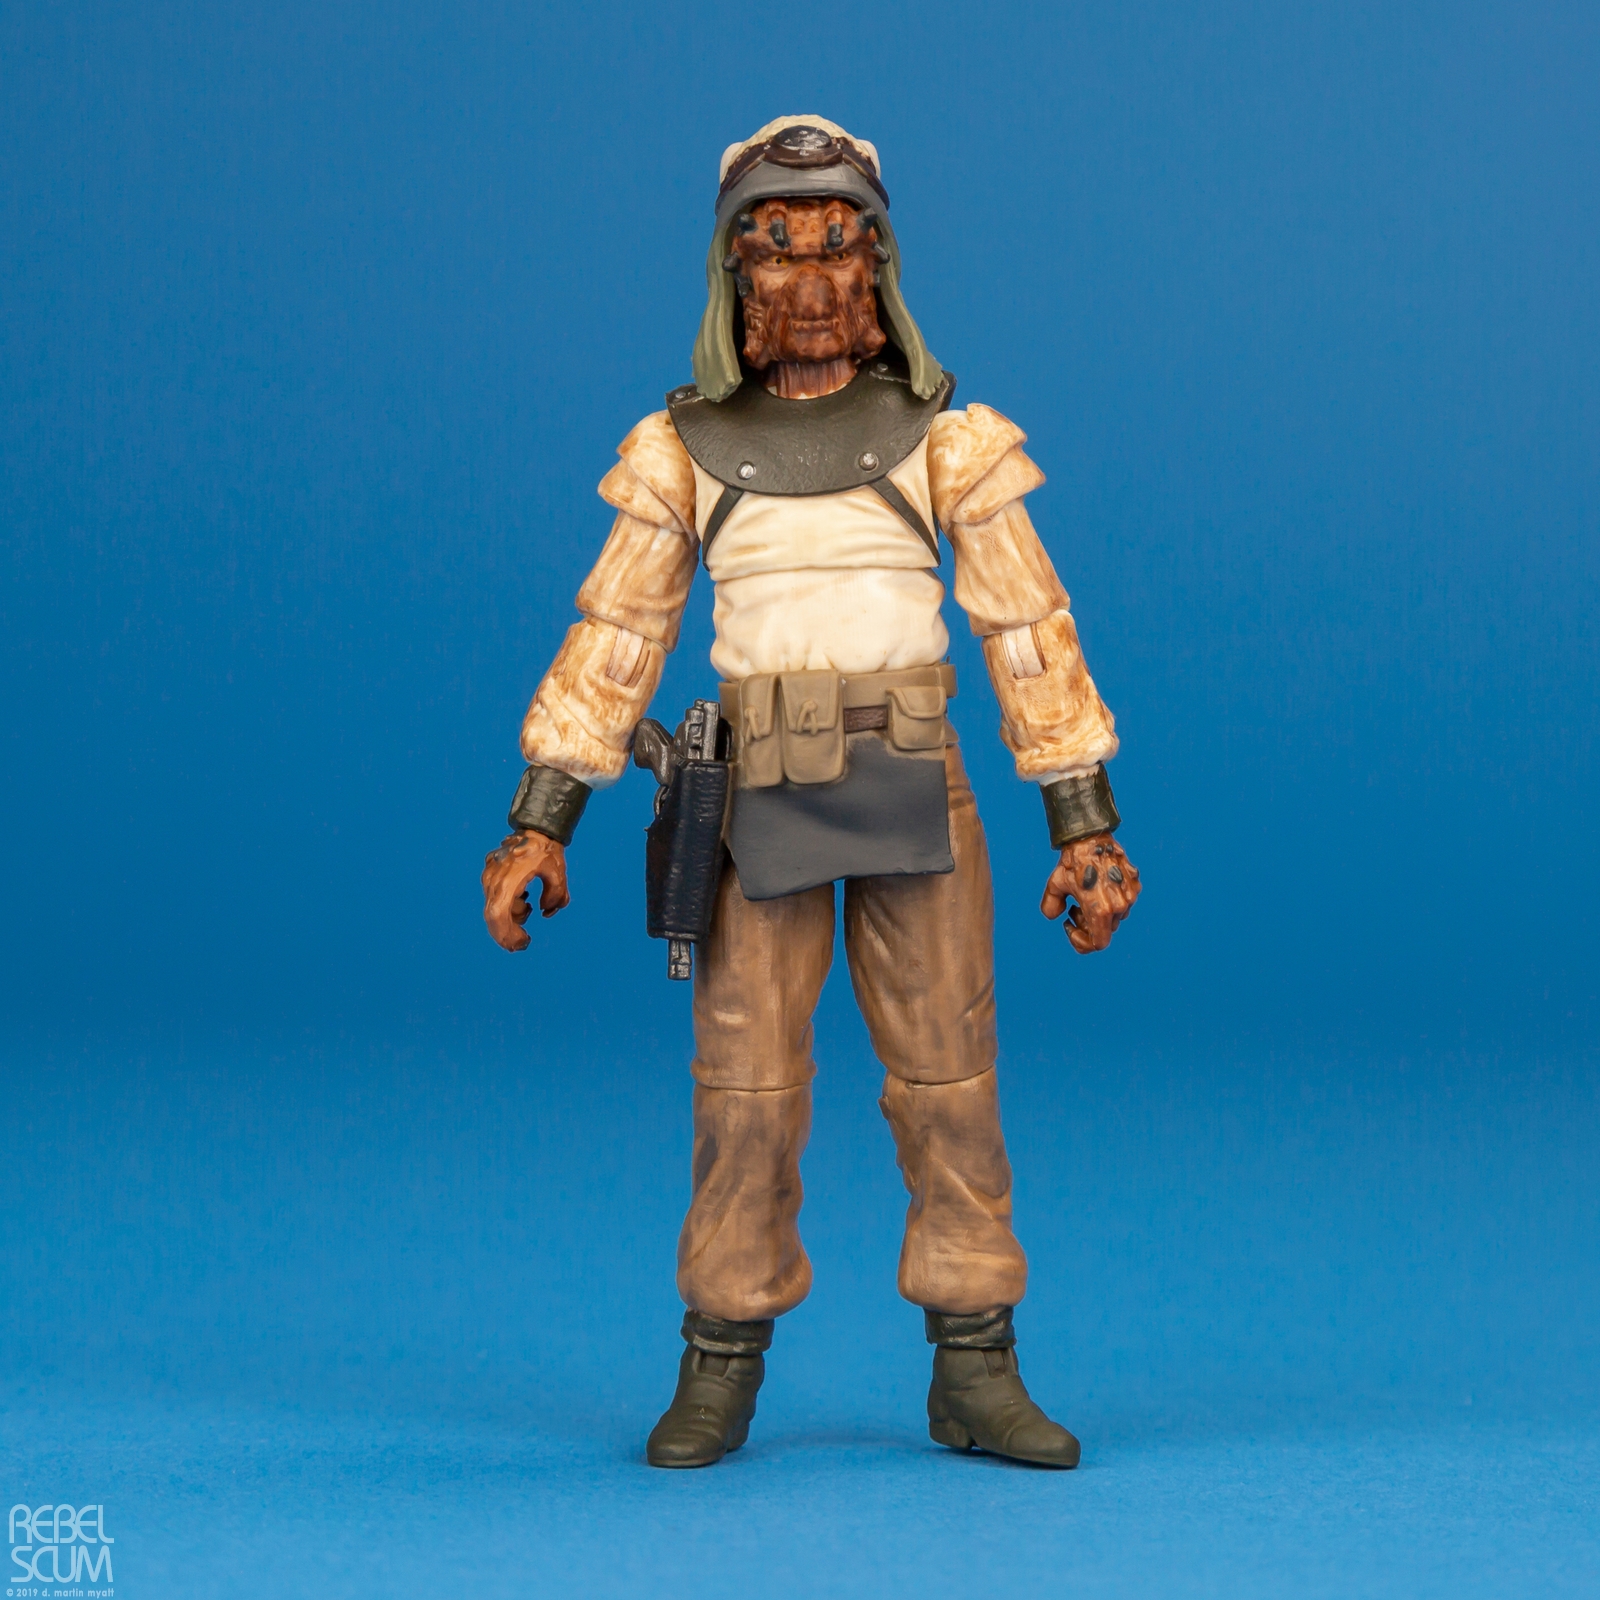 Special-3-Action-Figures-Set-The-Vintage-Collection-005.jpg